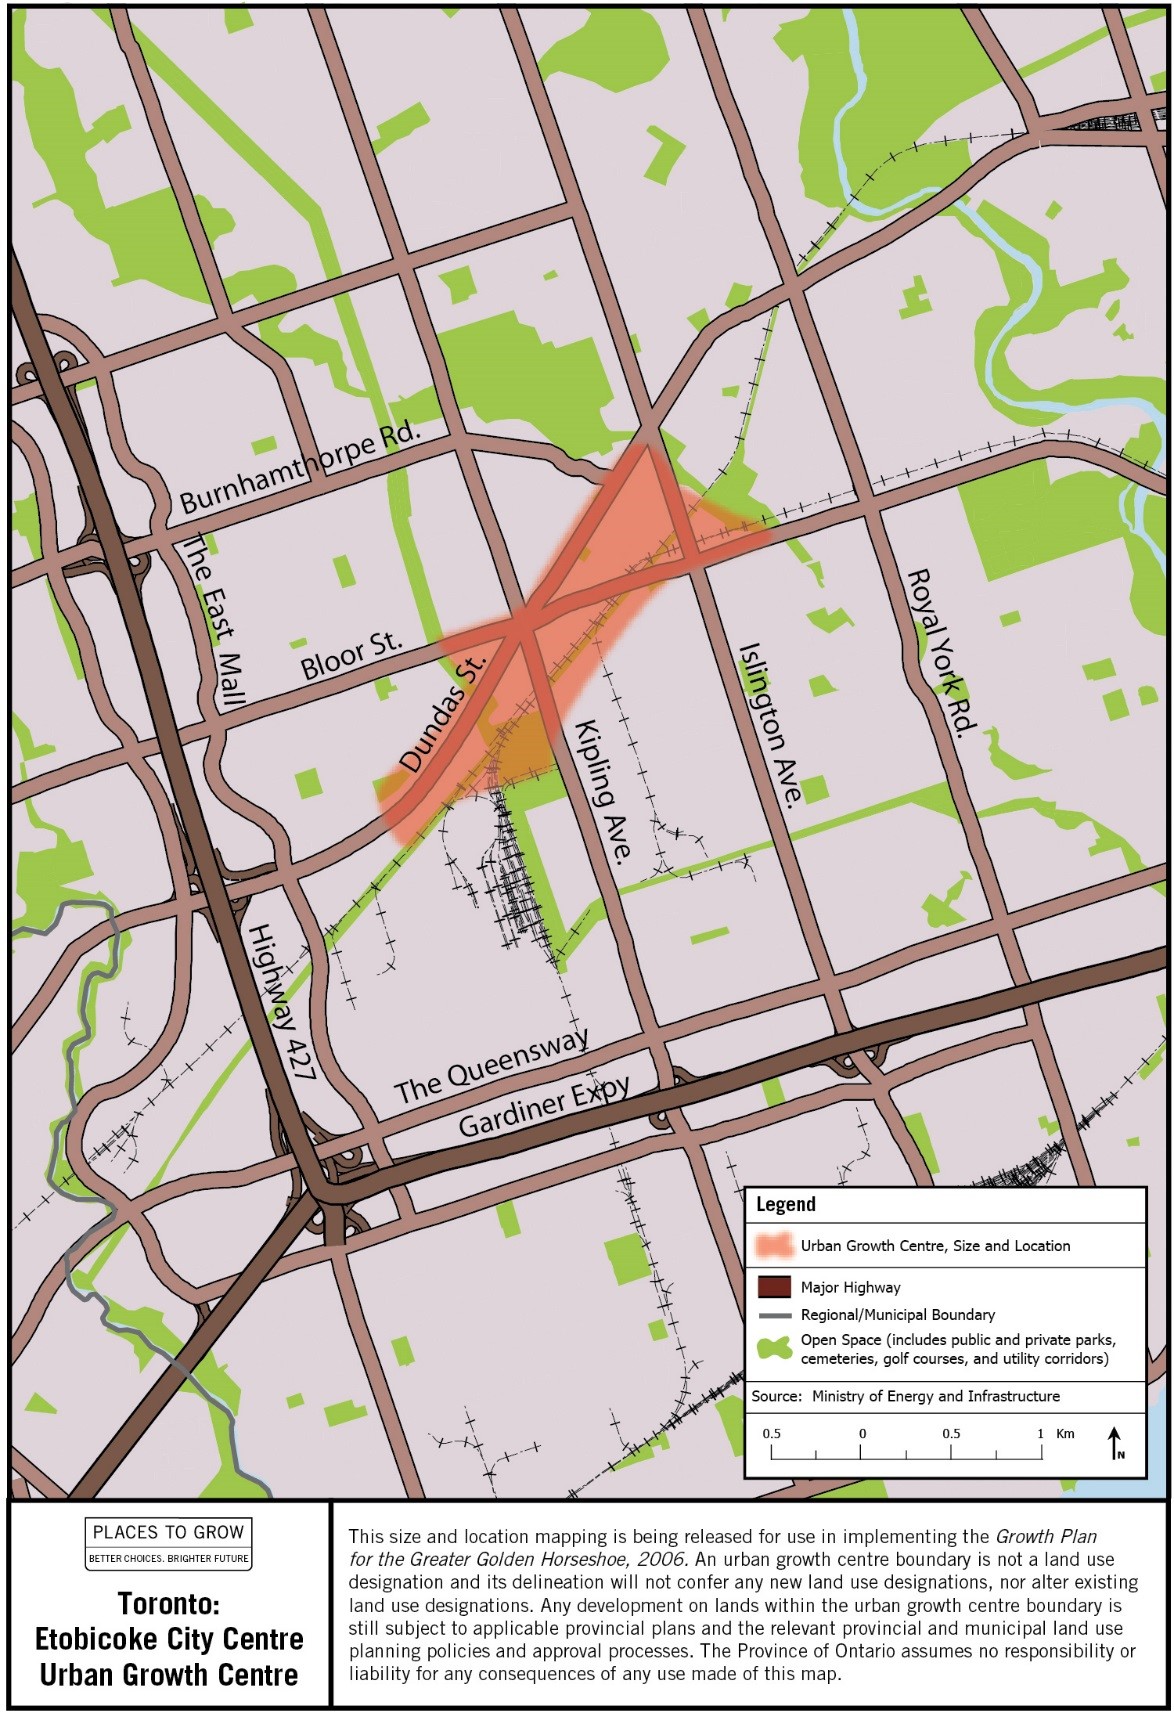 Map of the approximate size and location of the Toronto: Etobicoke City Centre Urban Growth Centre in the vicinity of Kipling Avenue and Dundas Street West.